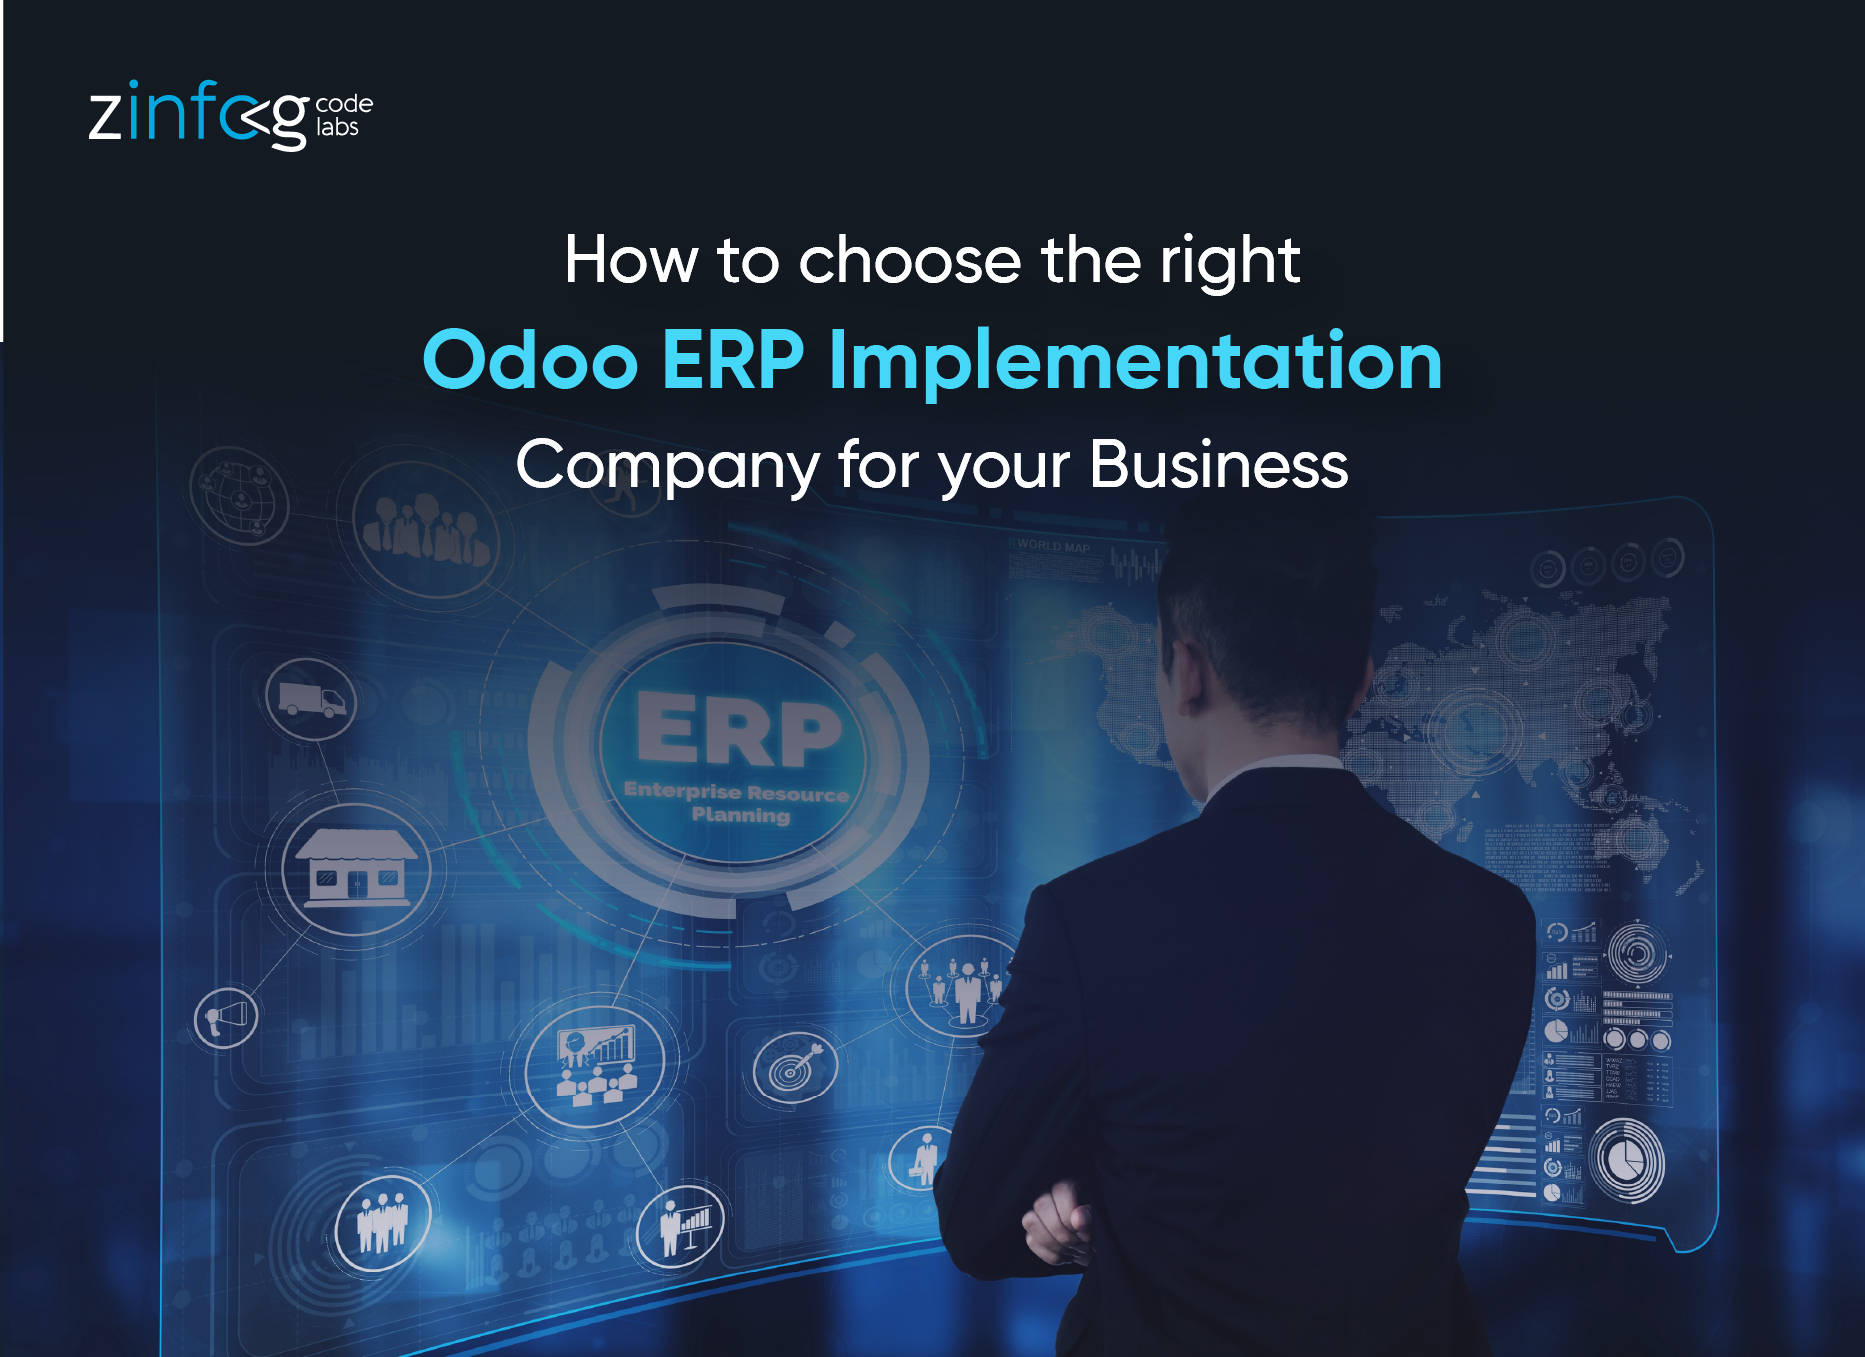 how-to-choose-the-right-odoo-erp-implementation-company-for-your-business.html